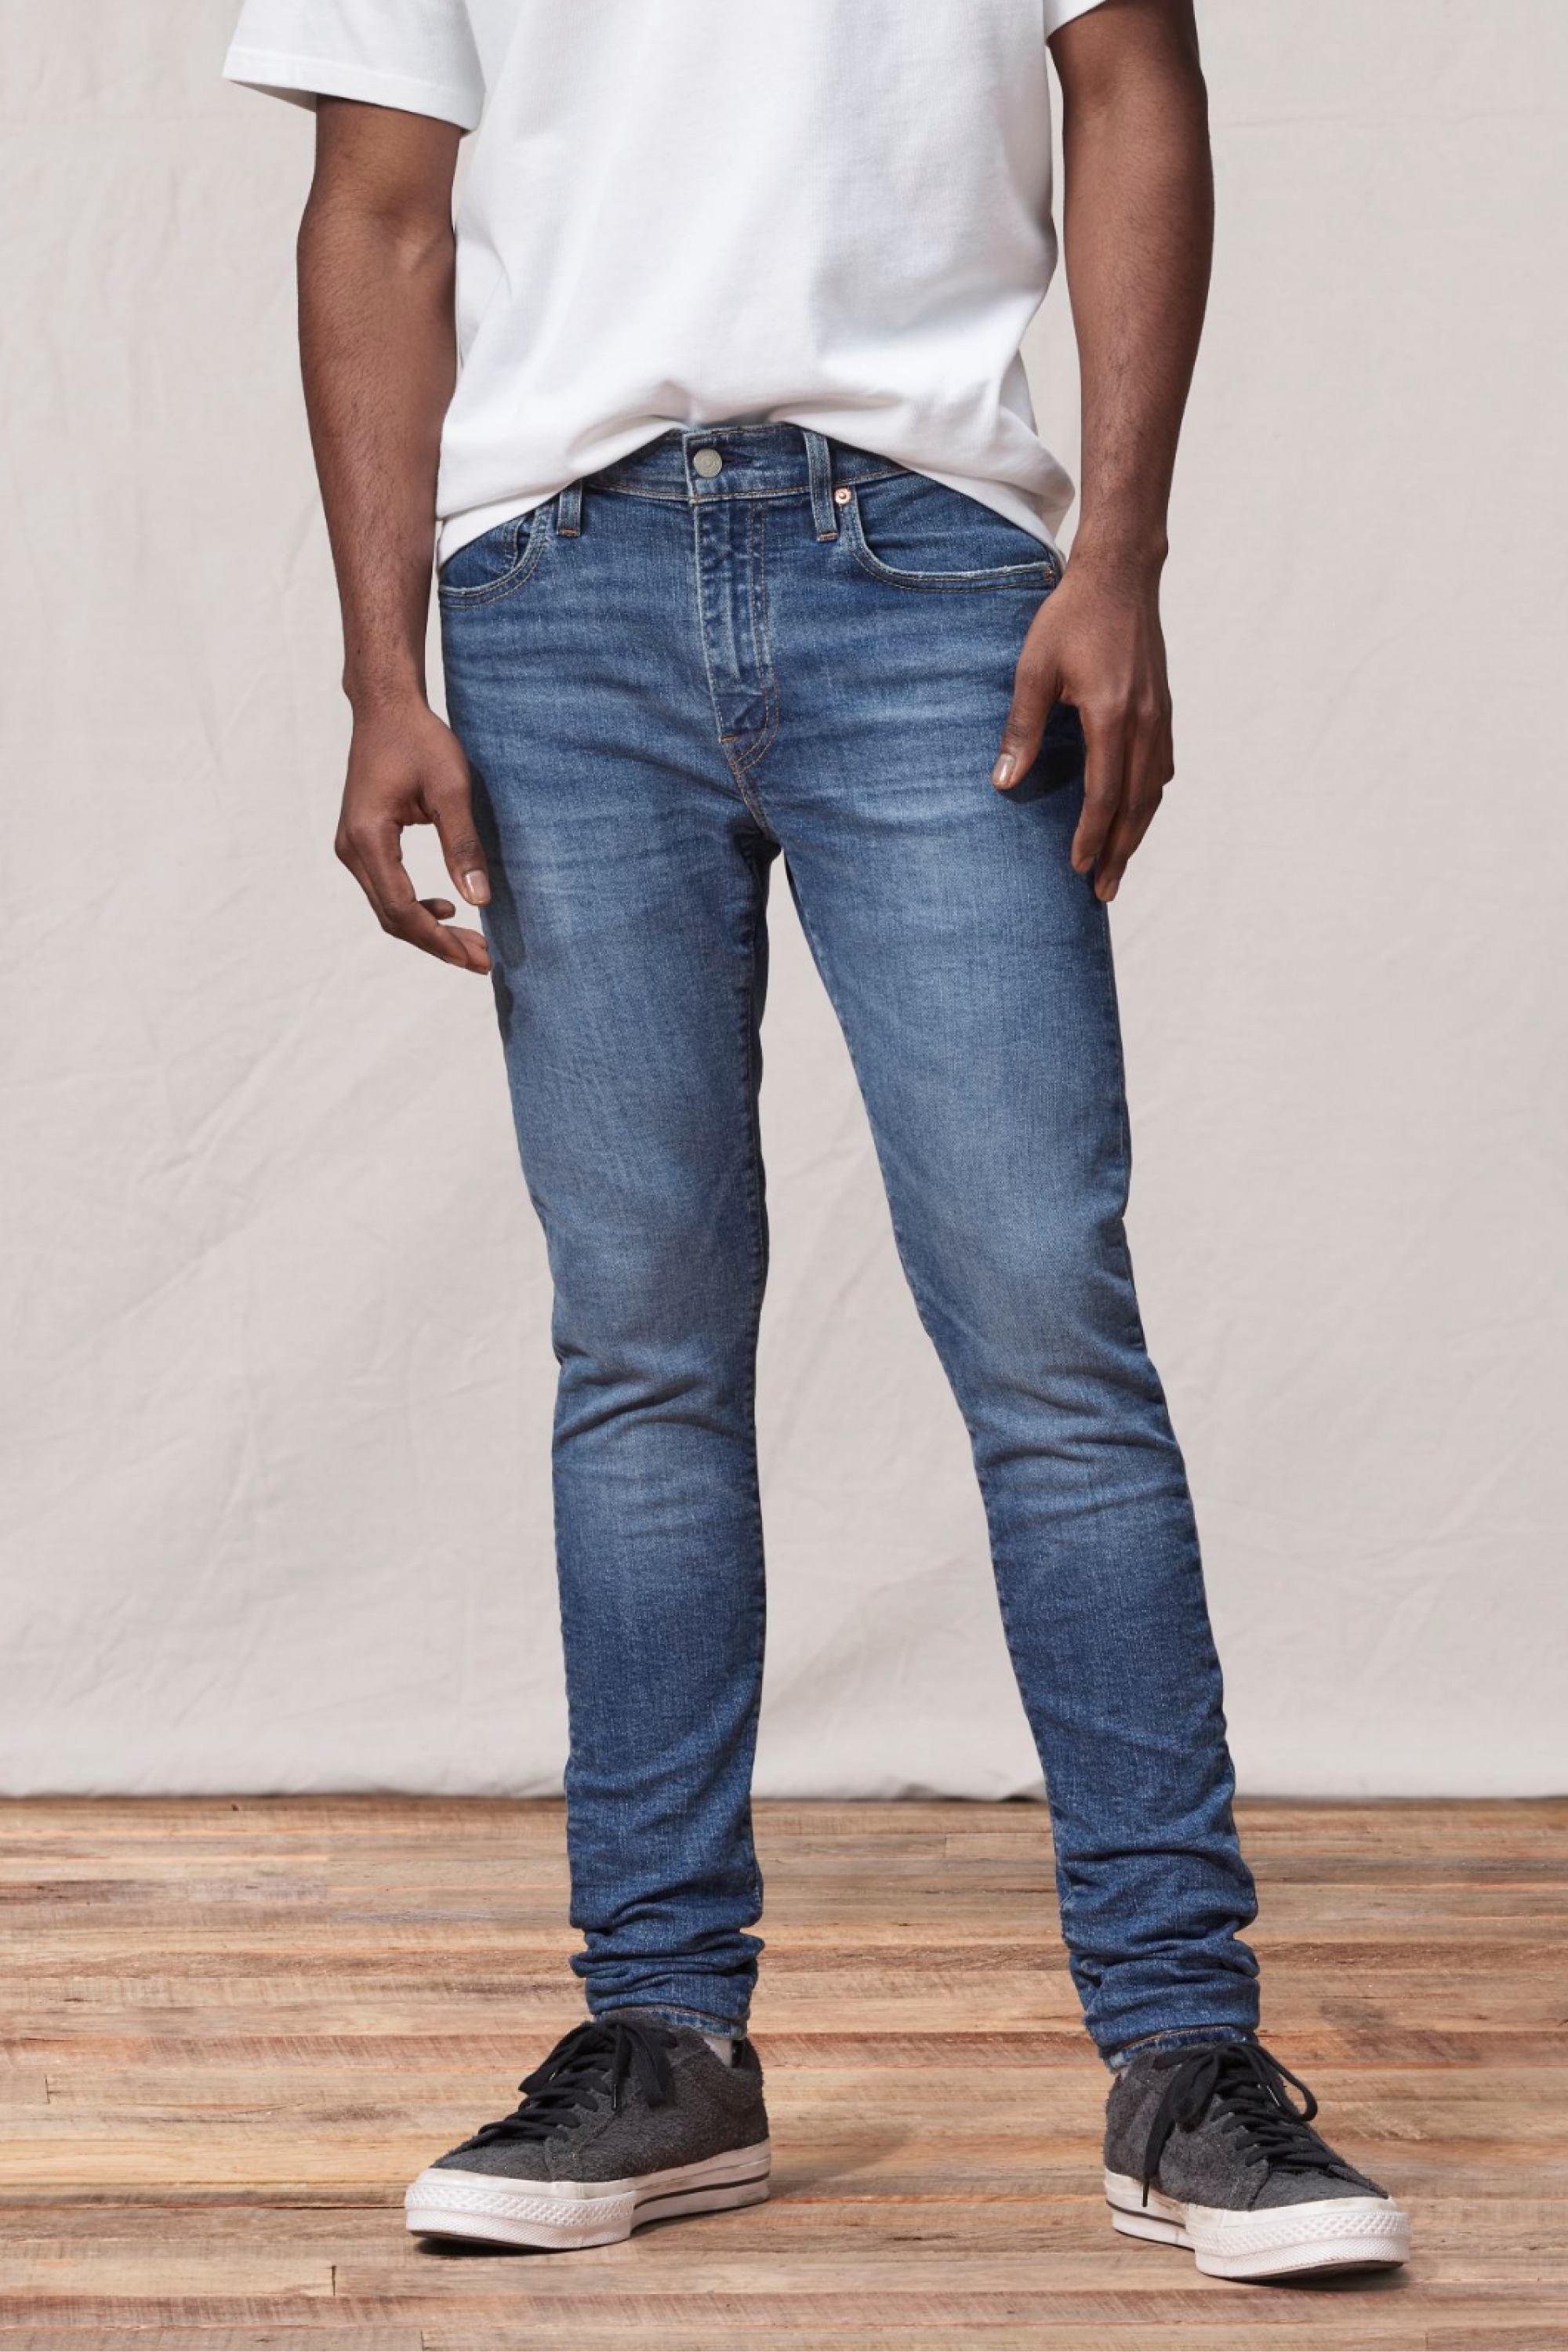 types of levi's jeans